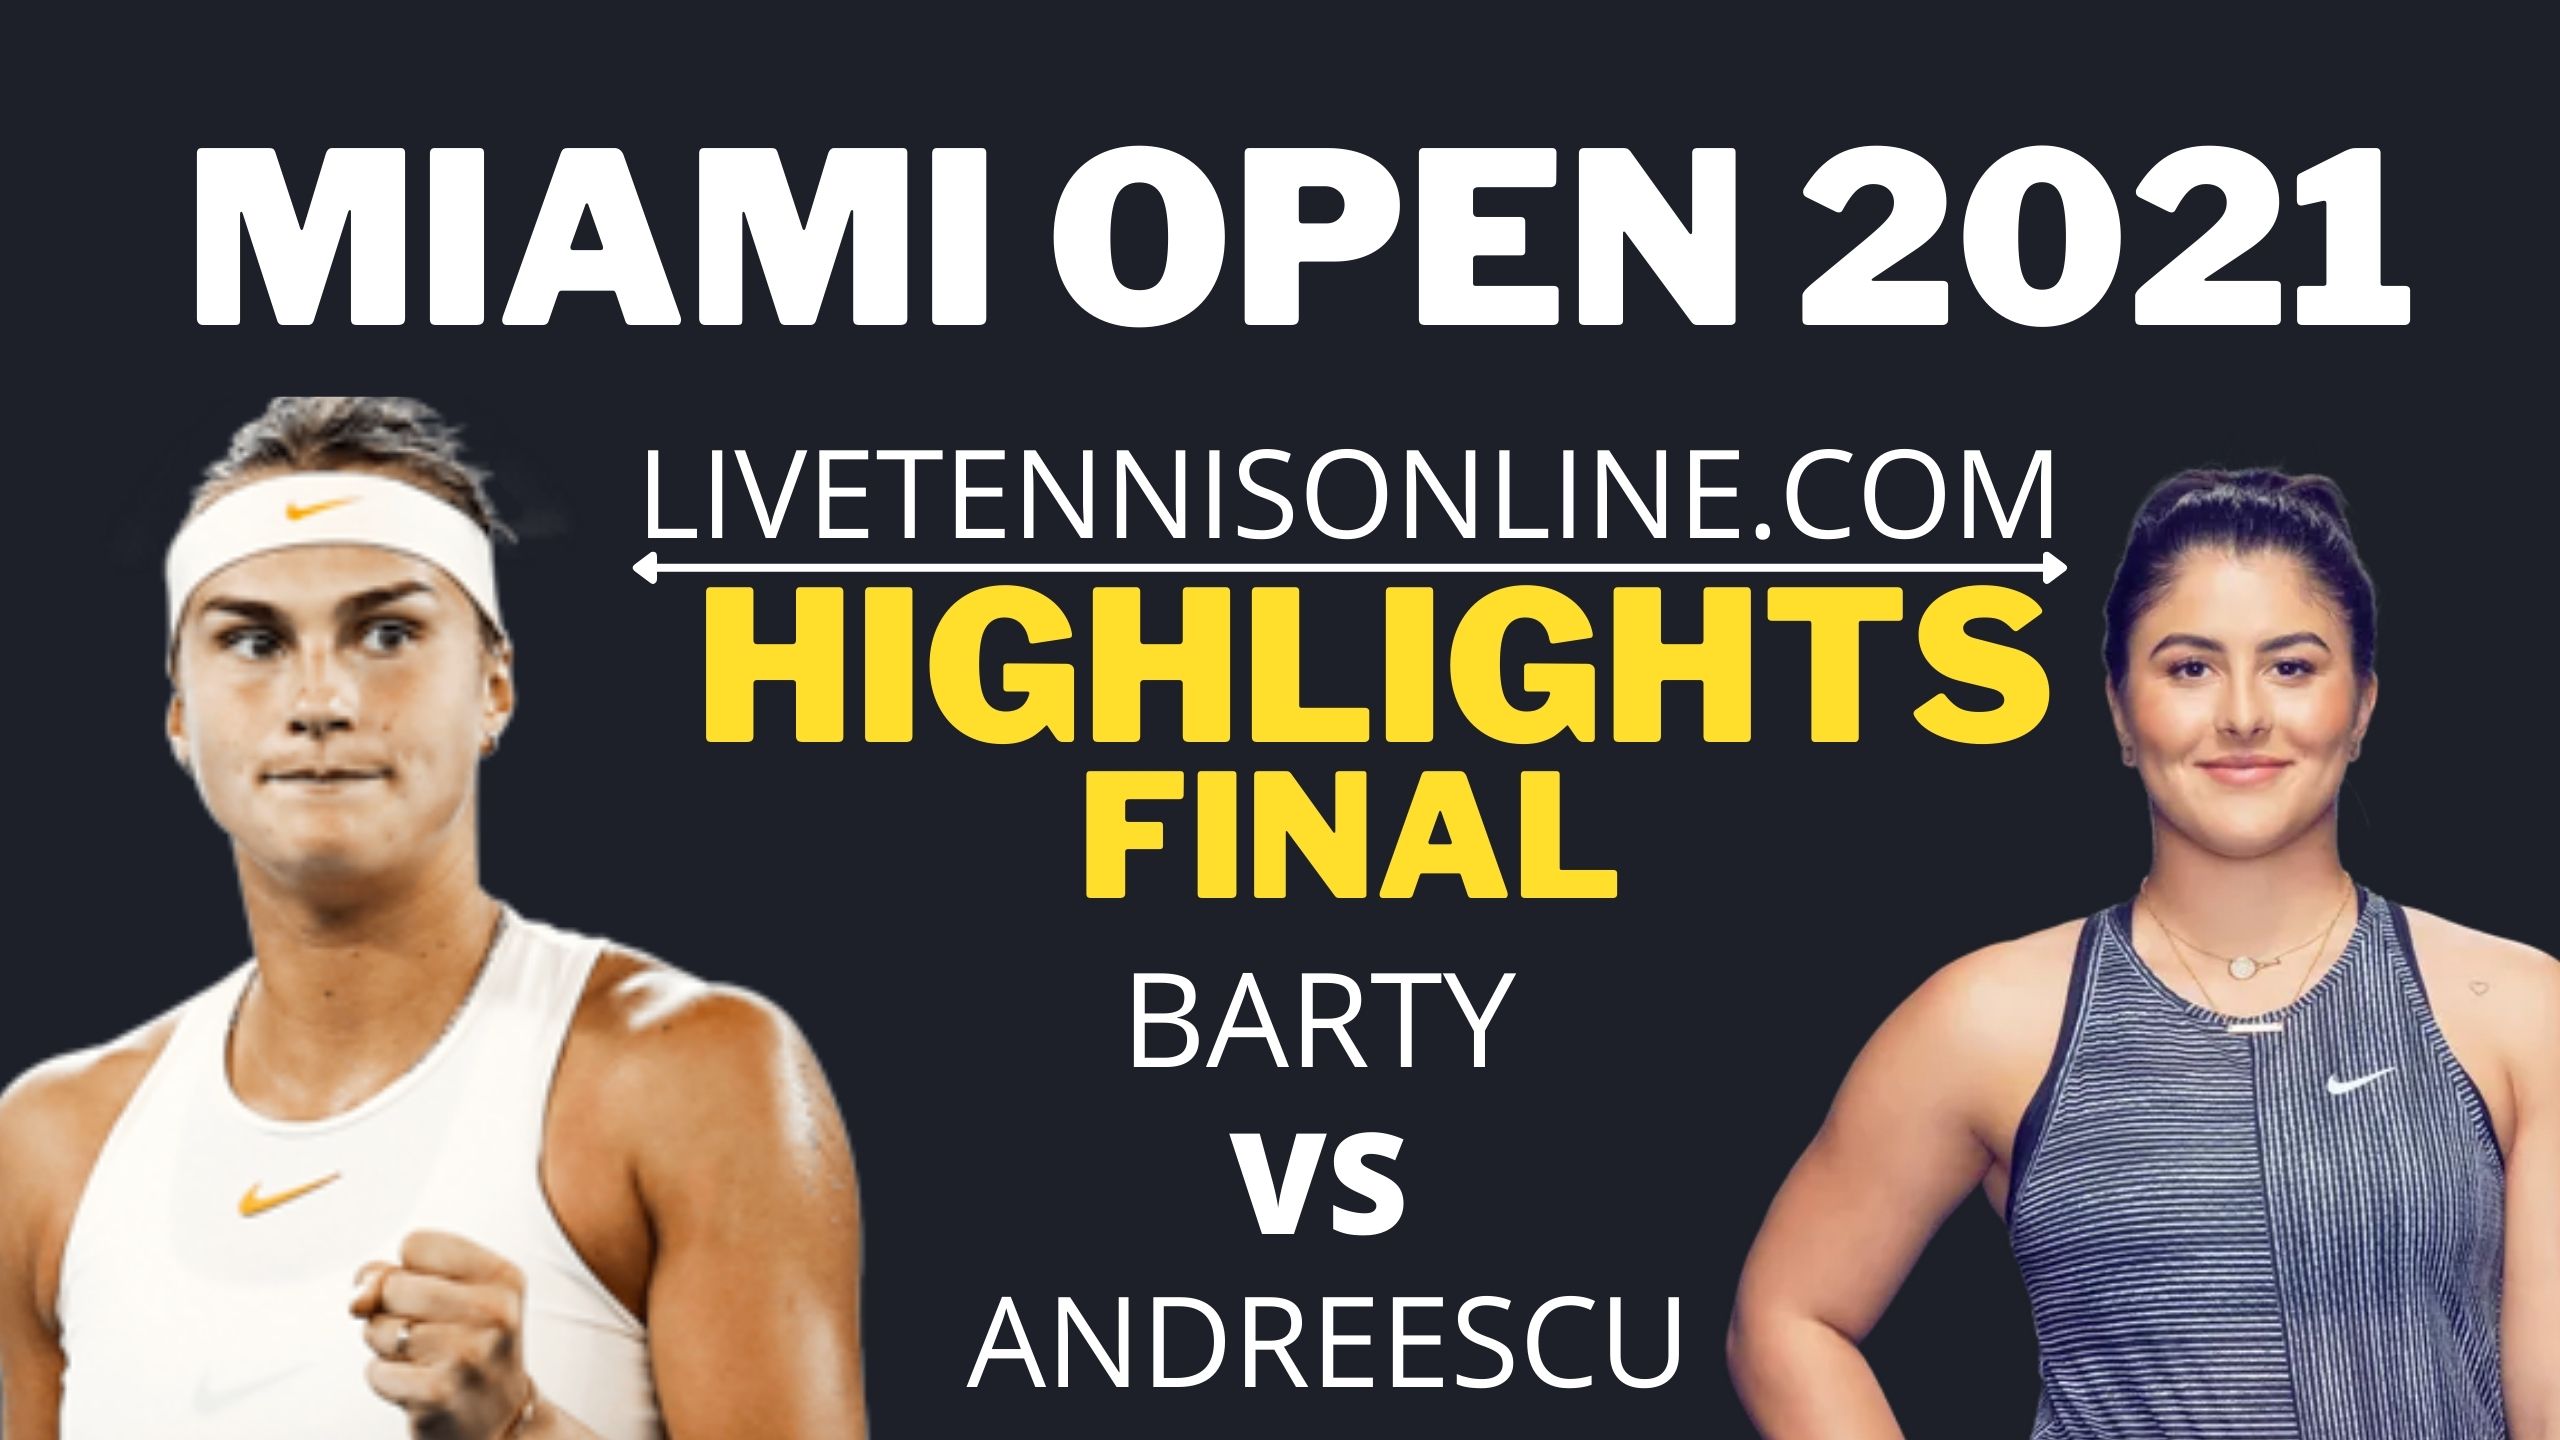 Barty Vs Andreescu Final Highlights 2021